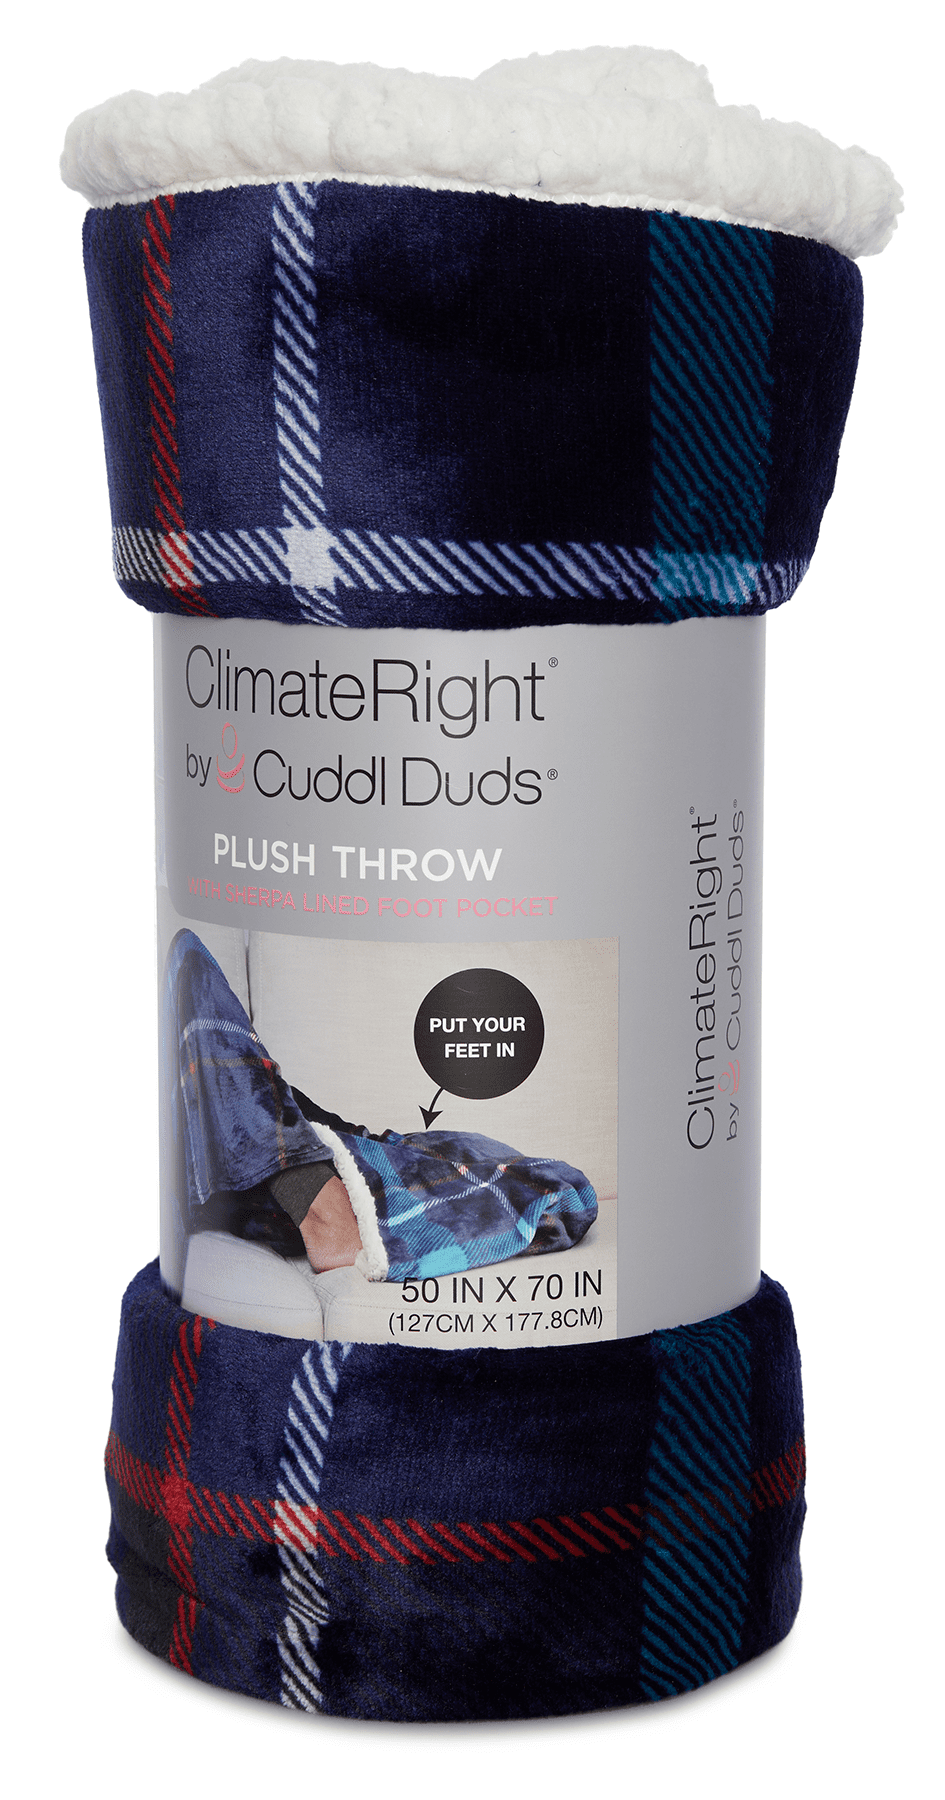 ClimateRight by Cuddl Duds Foot Pocket Plush Throw, Navy Plaid, 50" x 70"